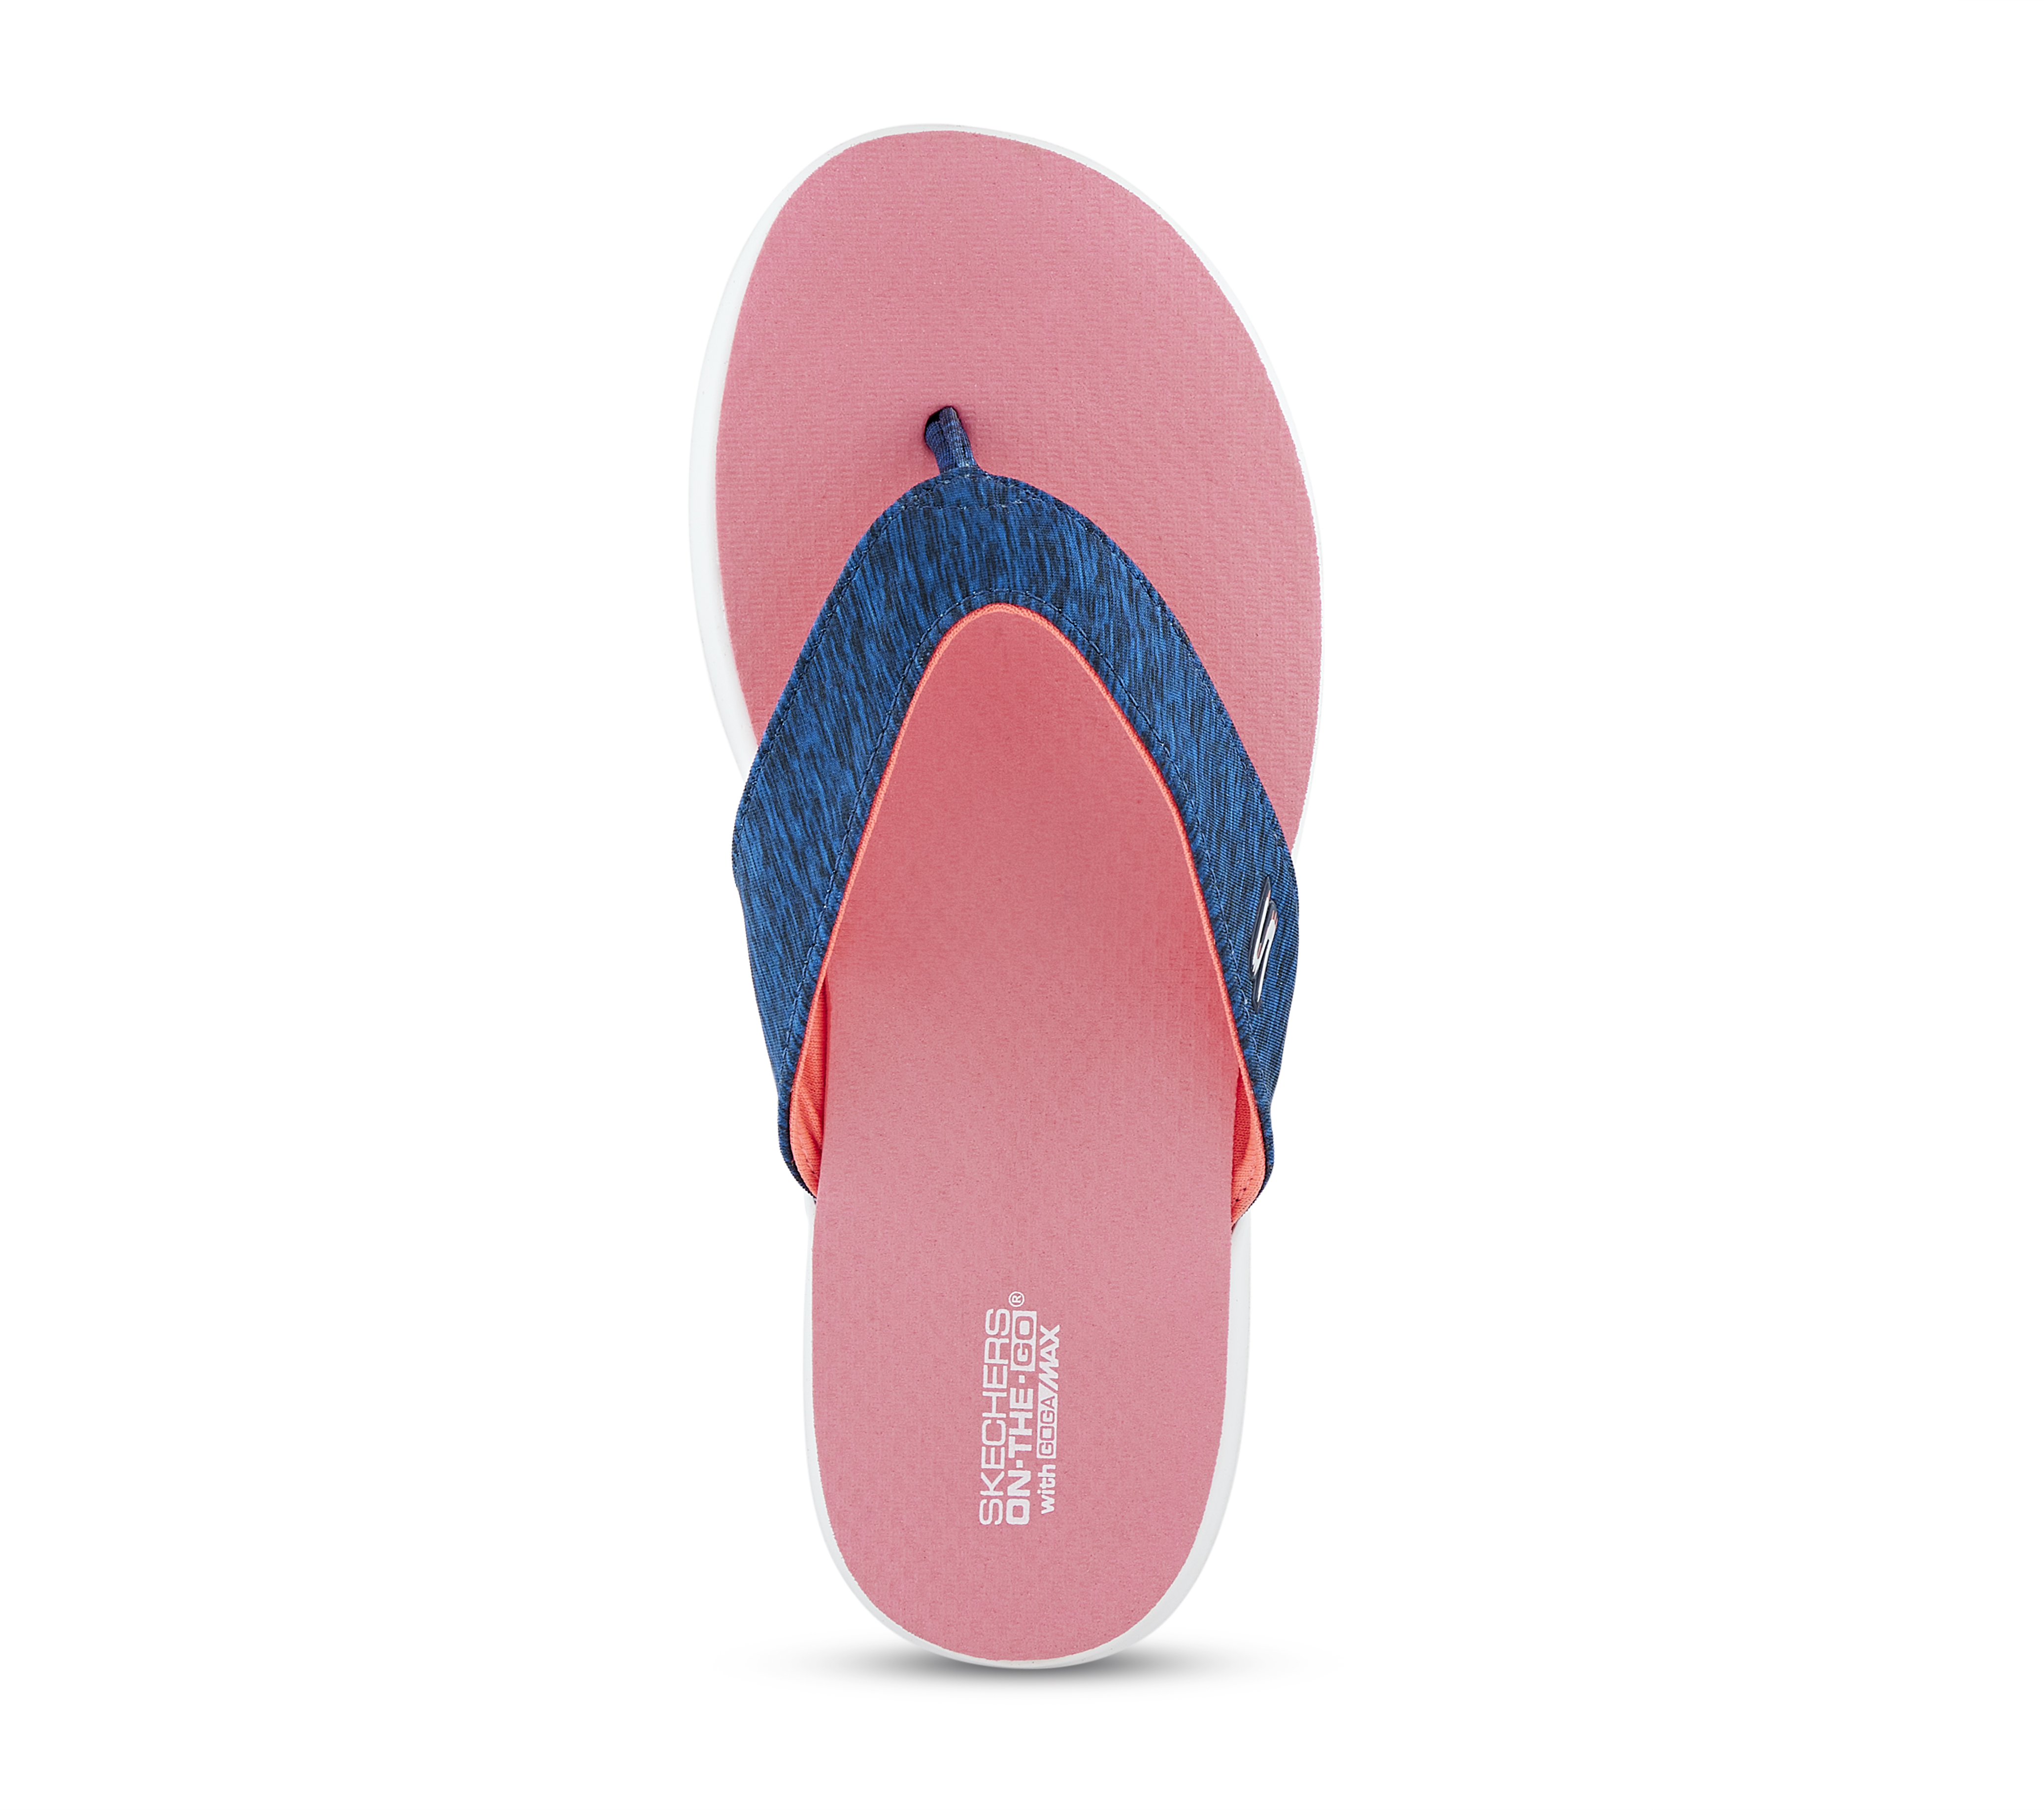 ON-THE-GO - MAUI, NAVY/PINK Footwear Top View